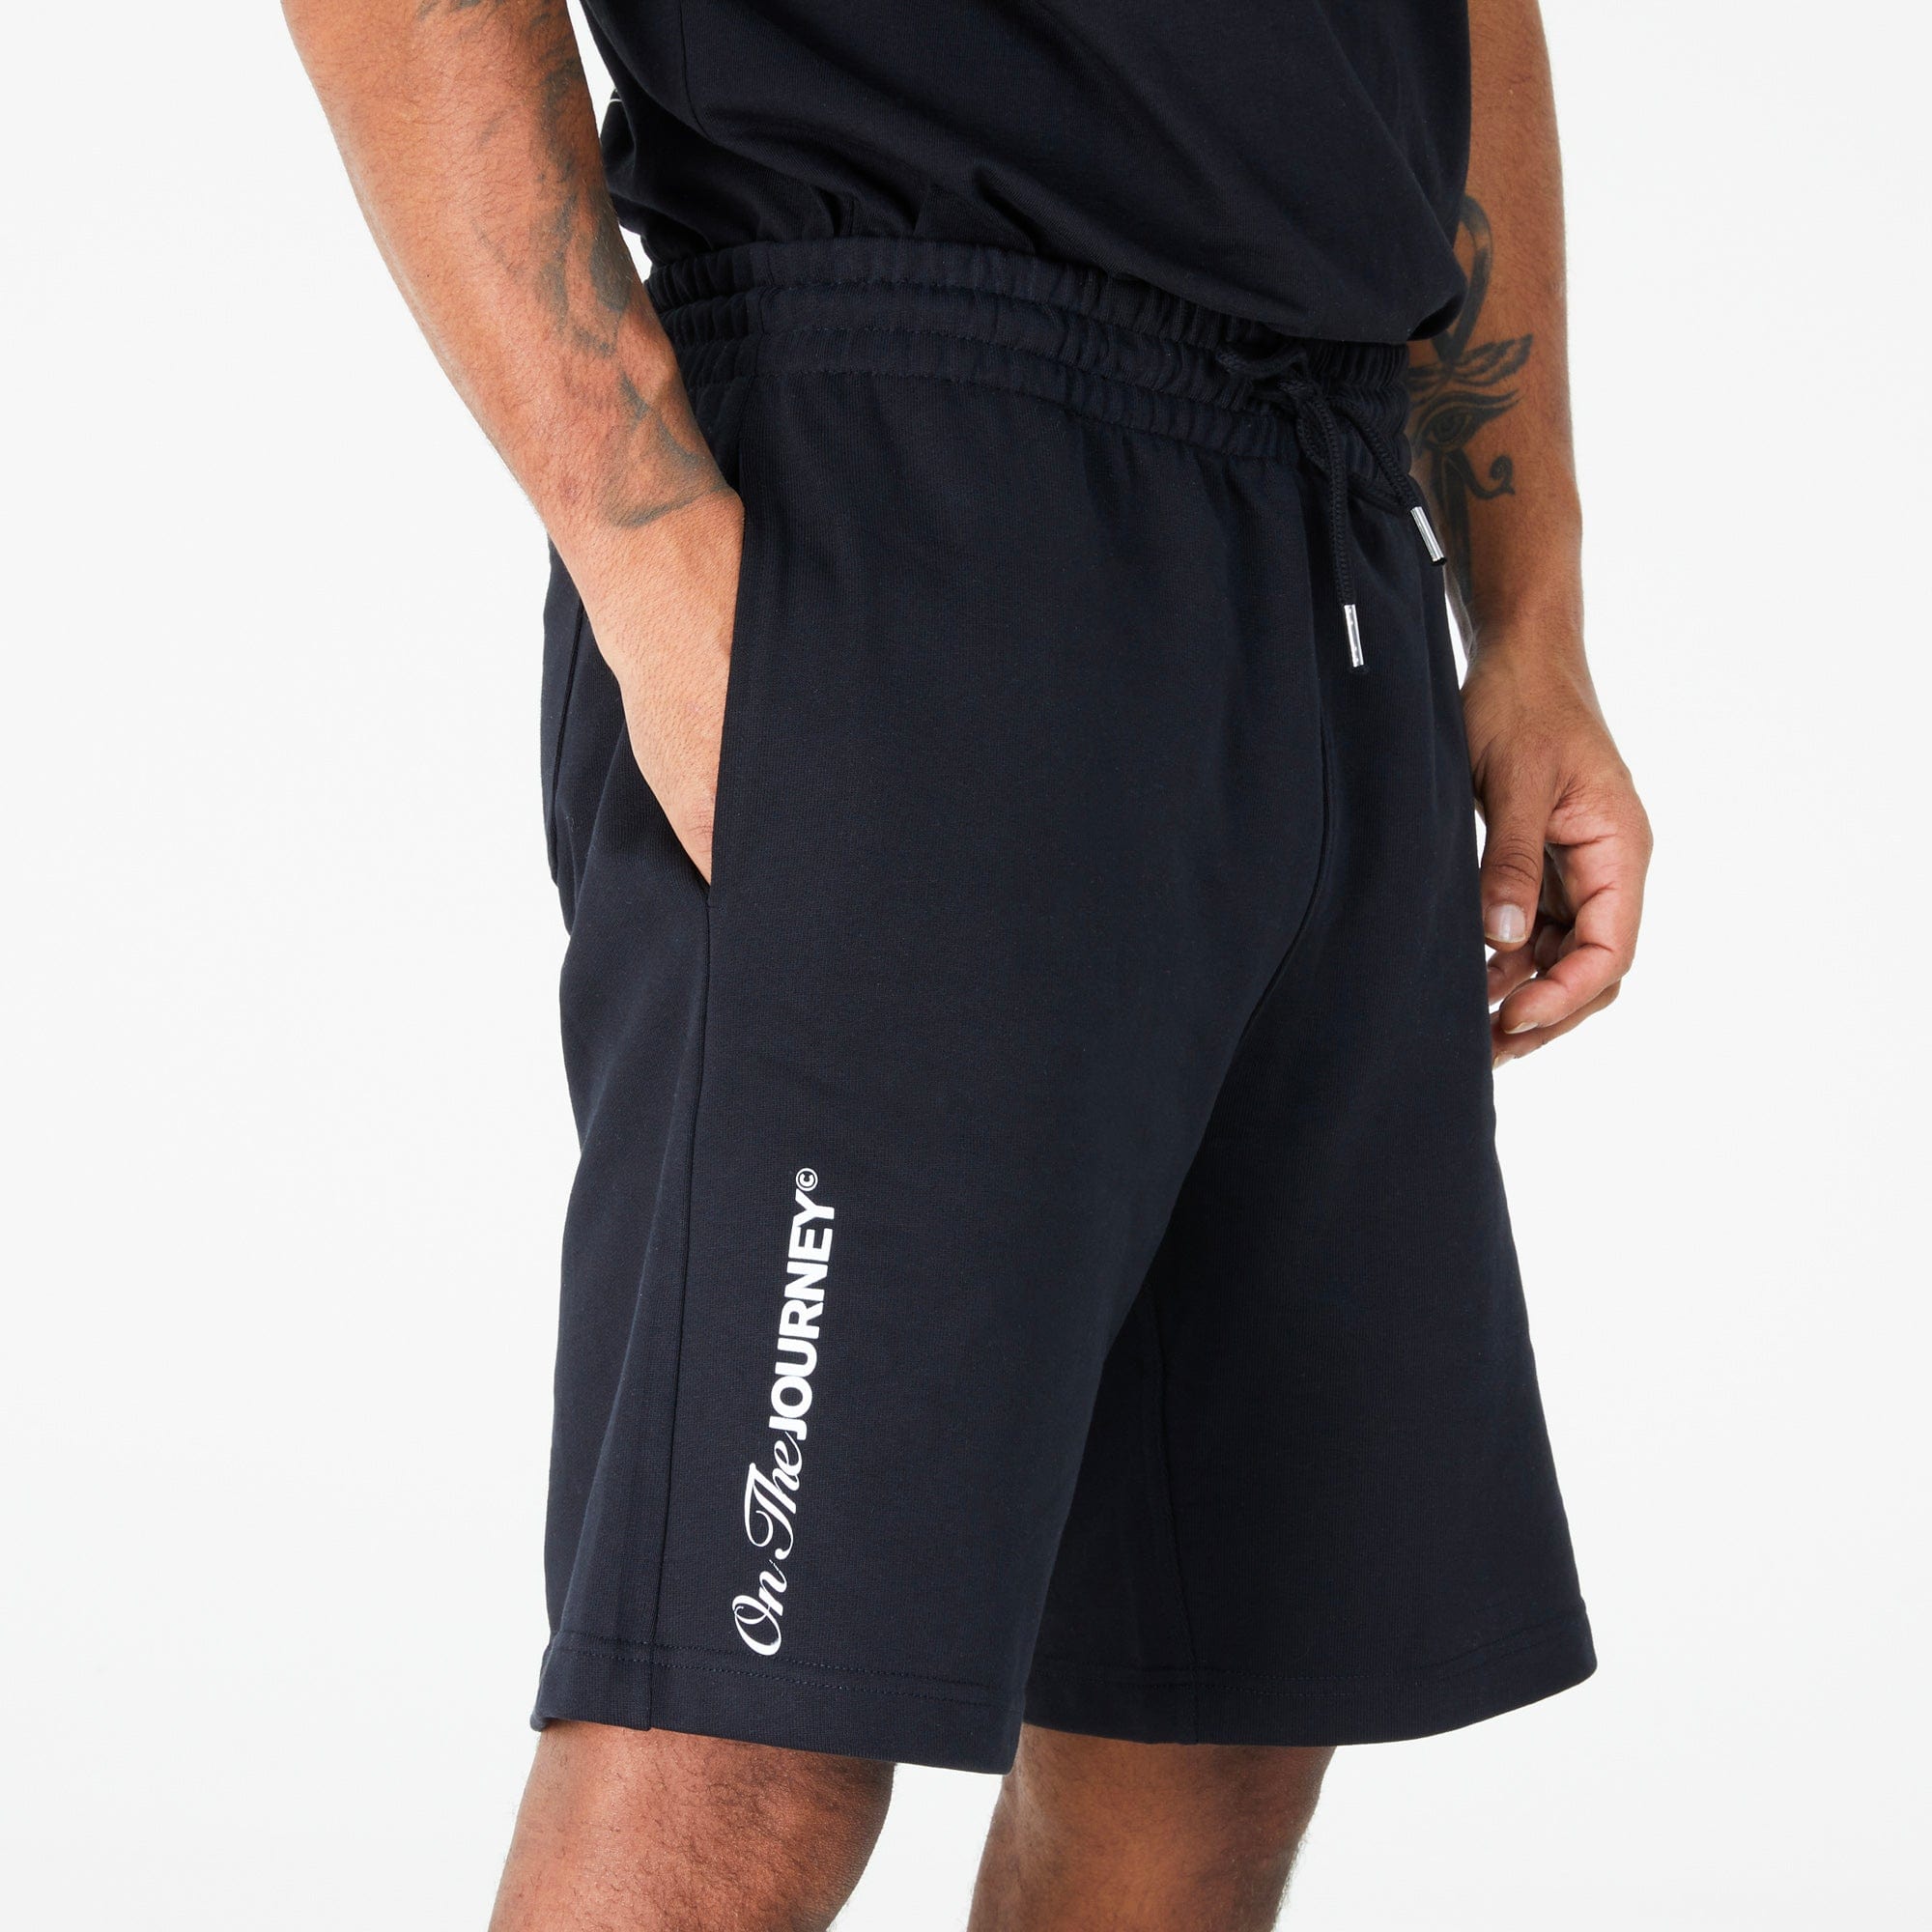 WIT Fitness Tracksuits WIT Transformation Jogger Short in Black and Bone